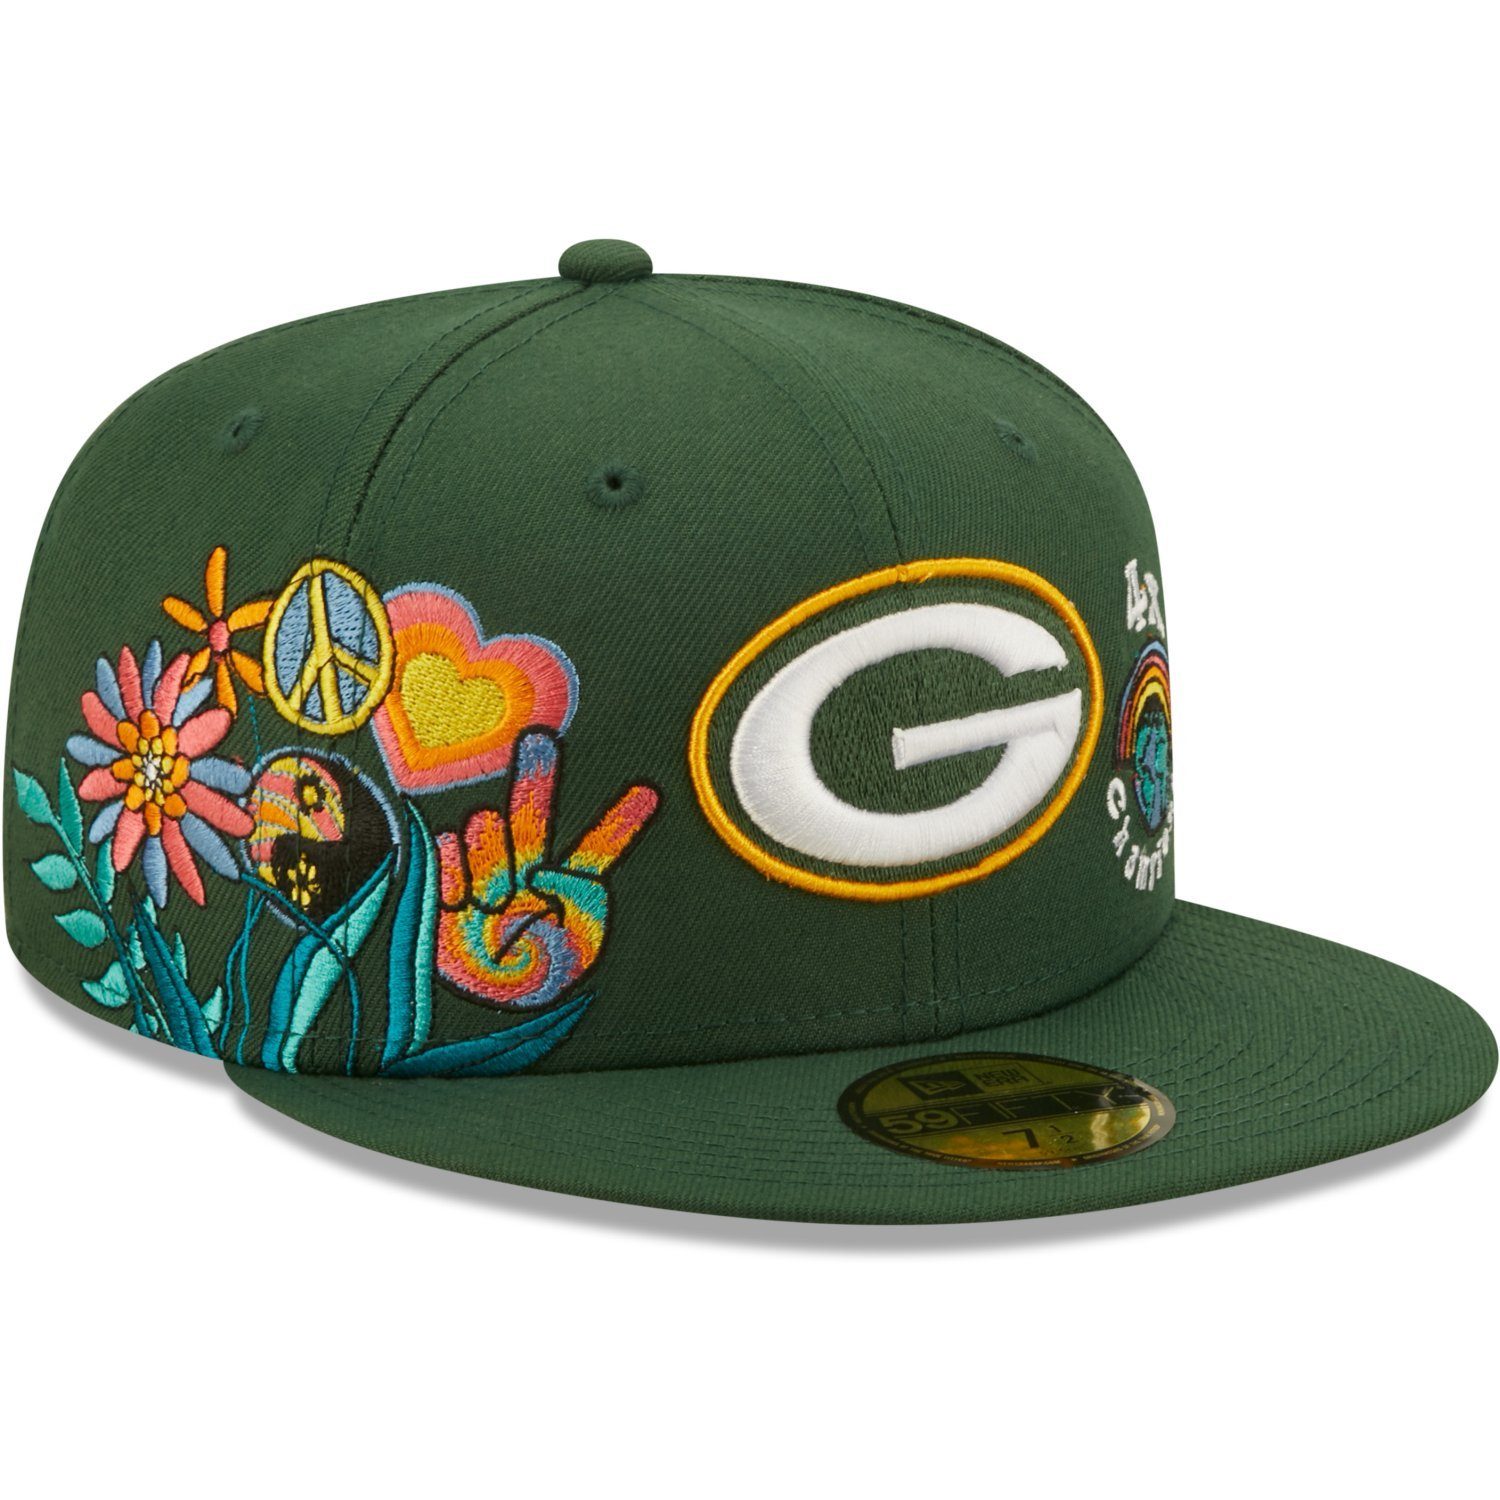 New Era Fitted Cap 59Fifty GROOVY Green Bay Packers